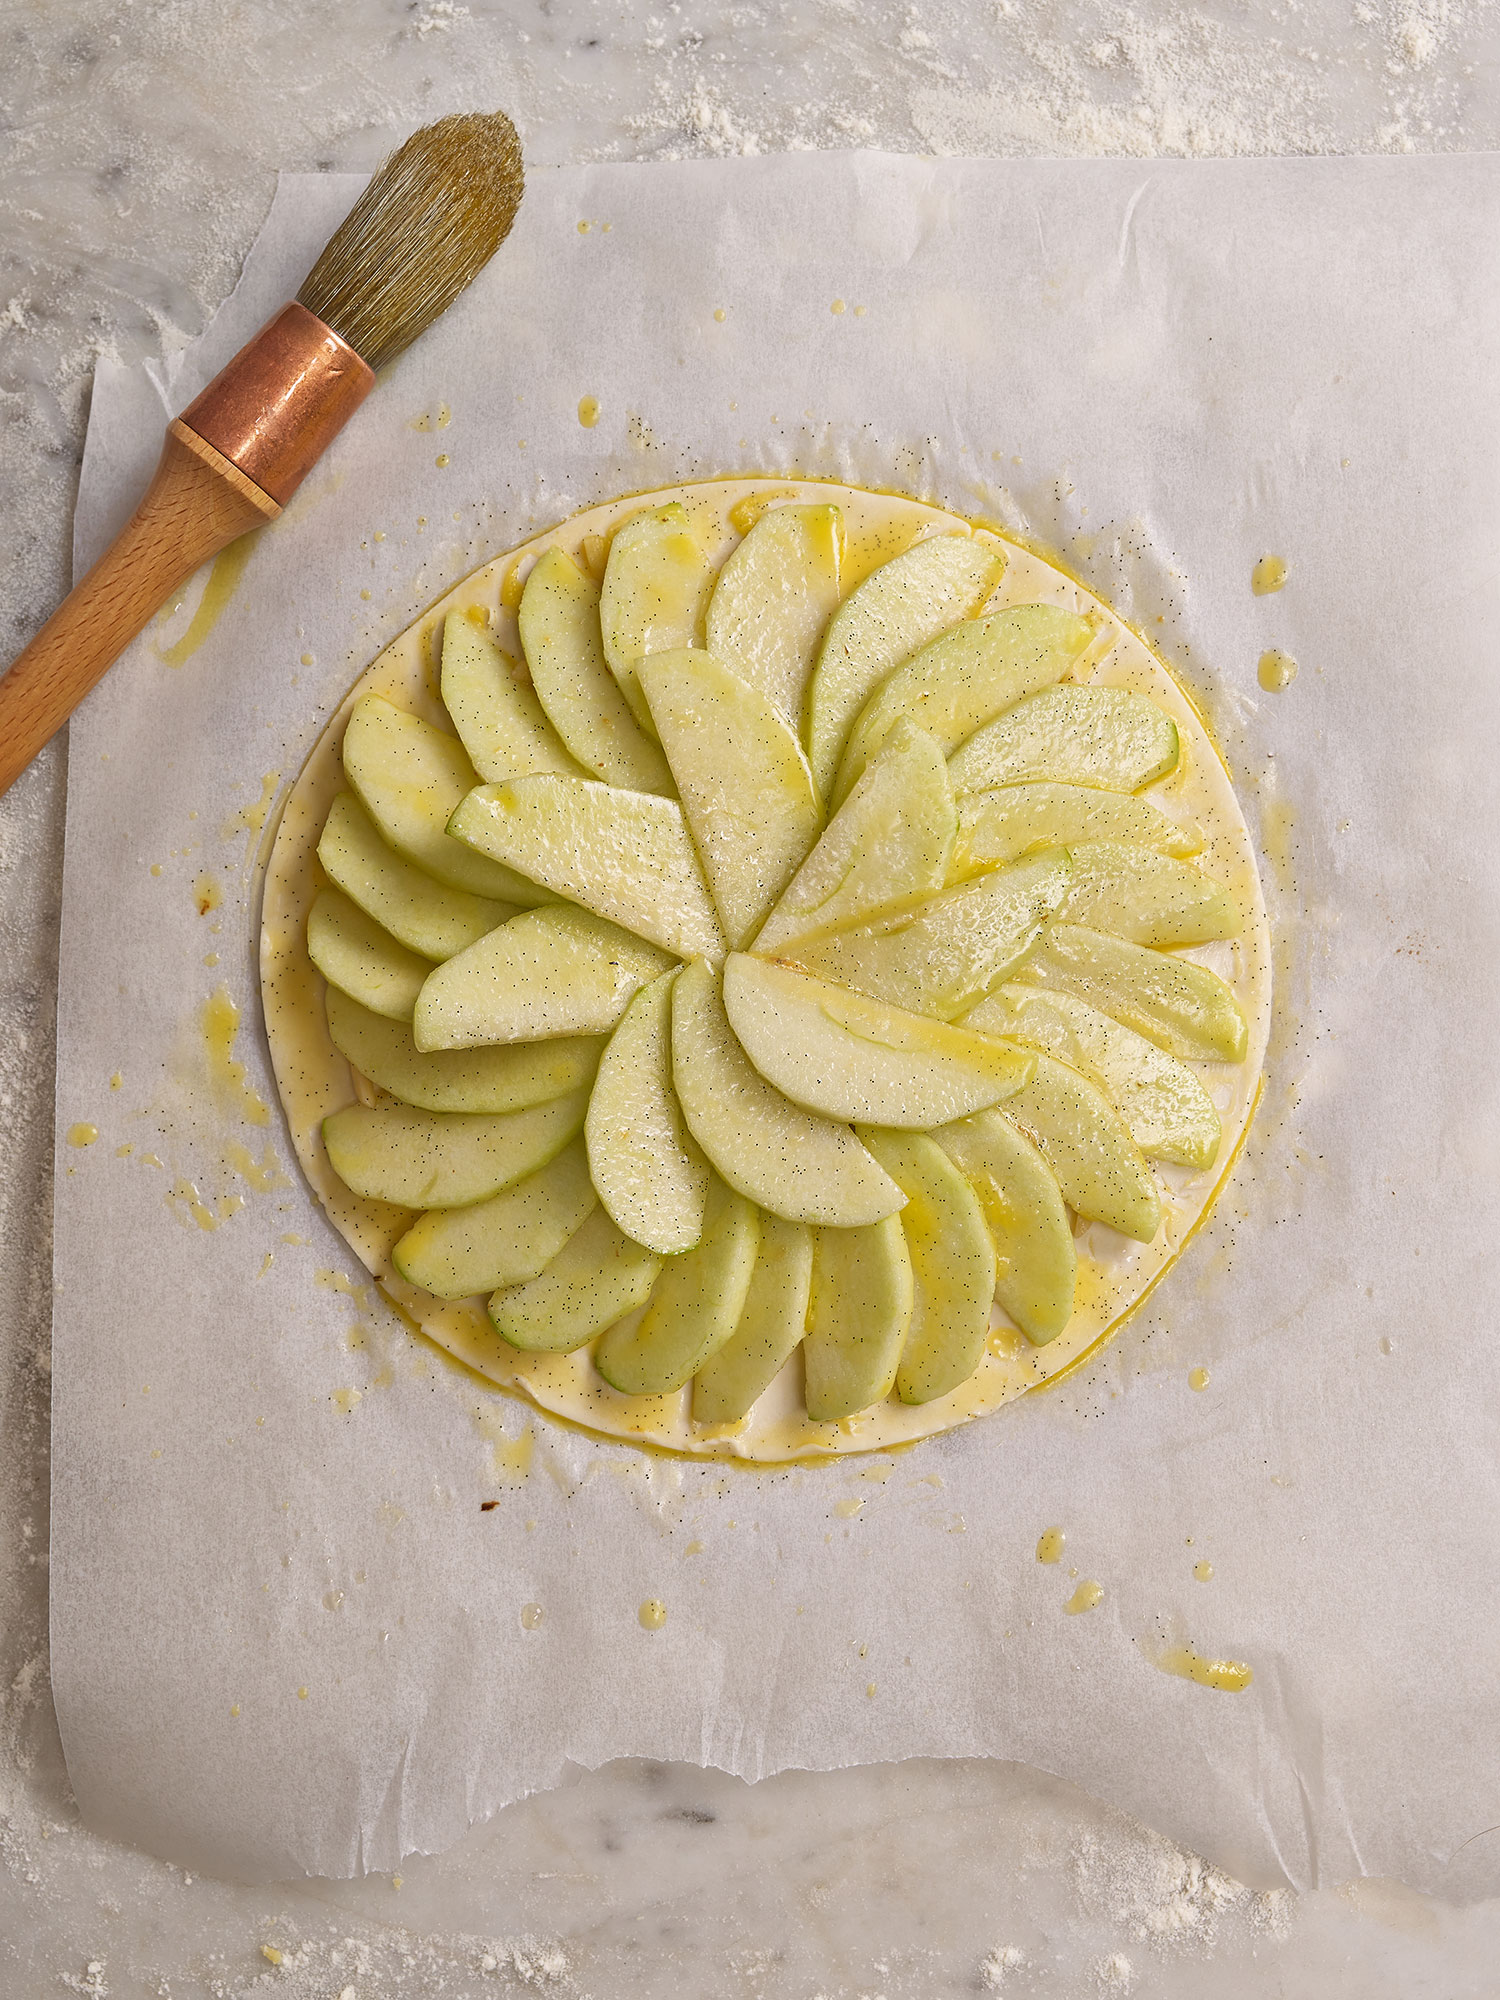 Tarte Fine aux Pommes - arranging the apples on the pastry 